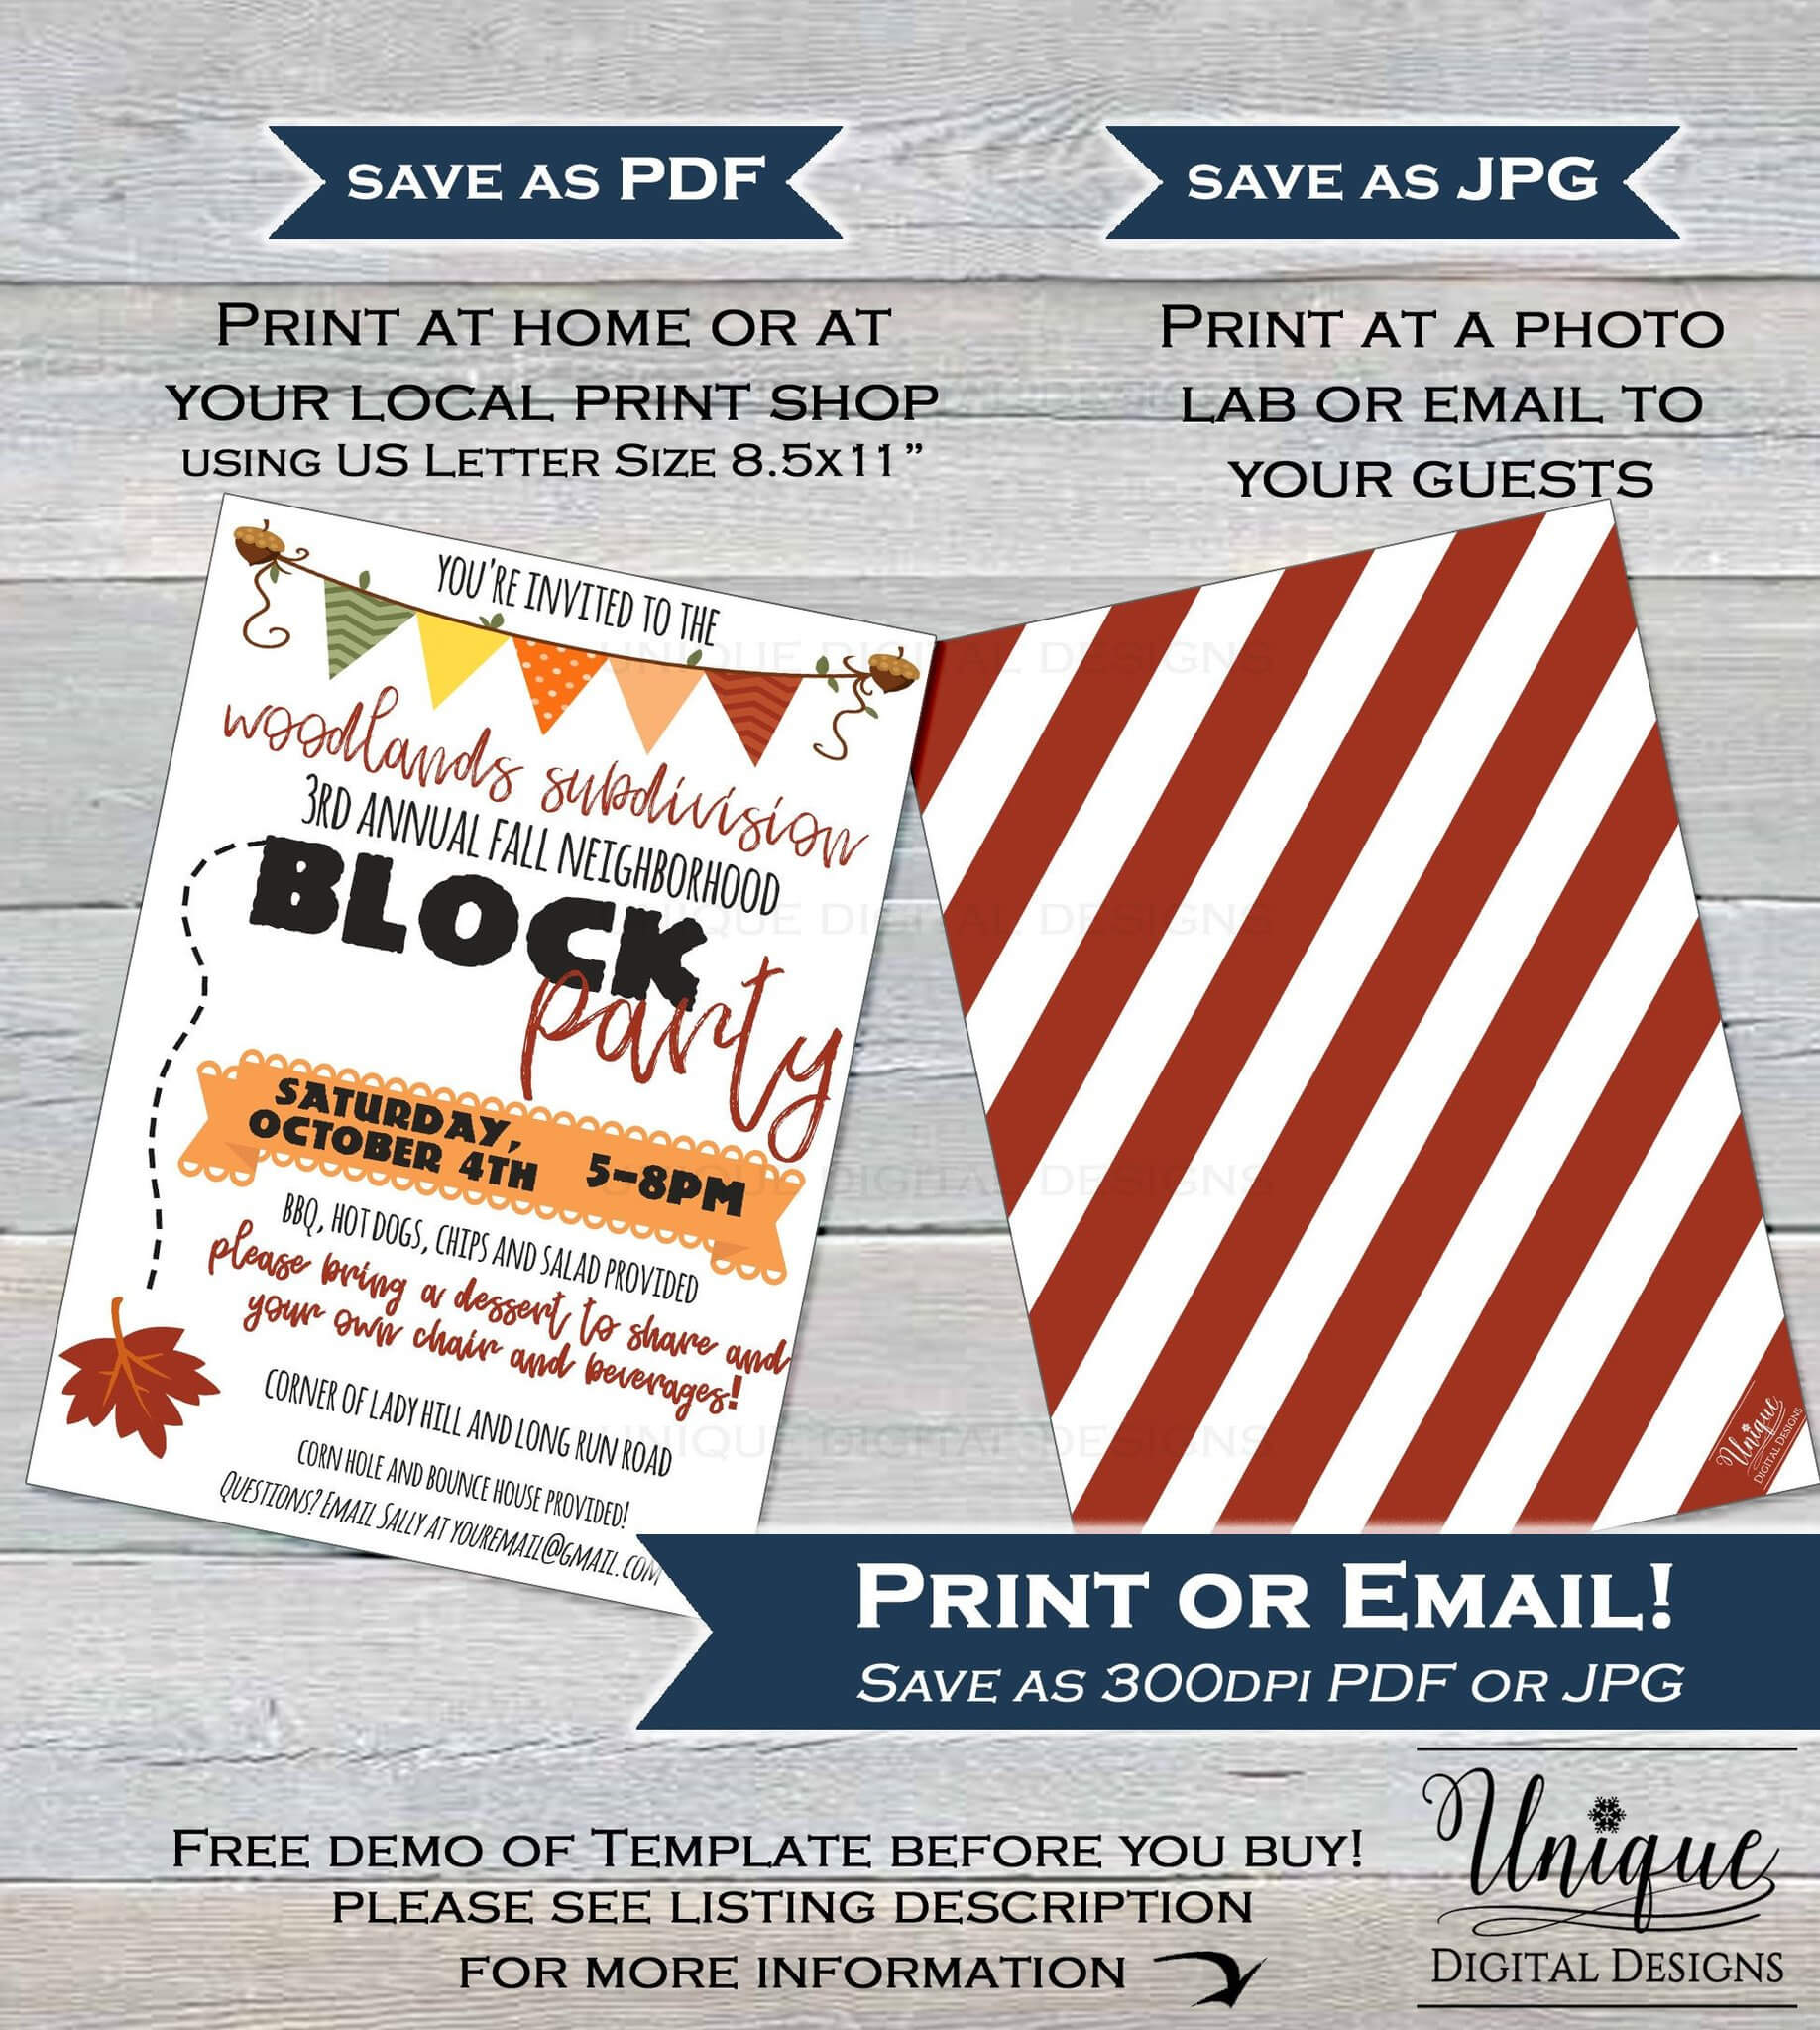 023 Block Party Flyers Templates Template Ideas Retirement Intended For Block Party Template Flyers Free